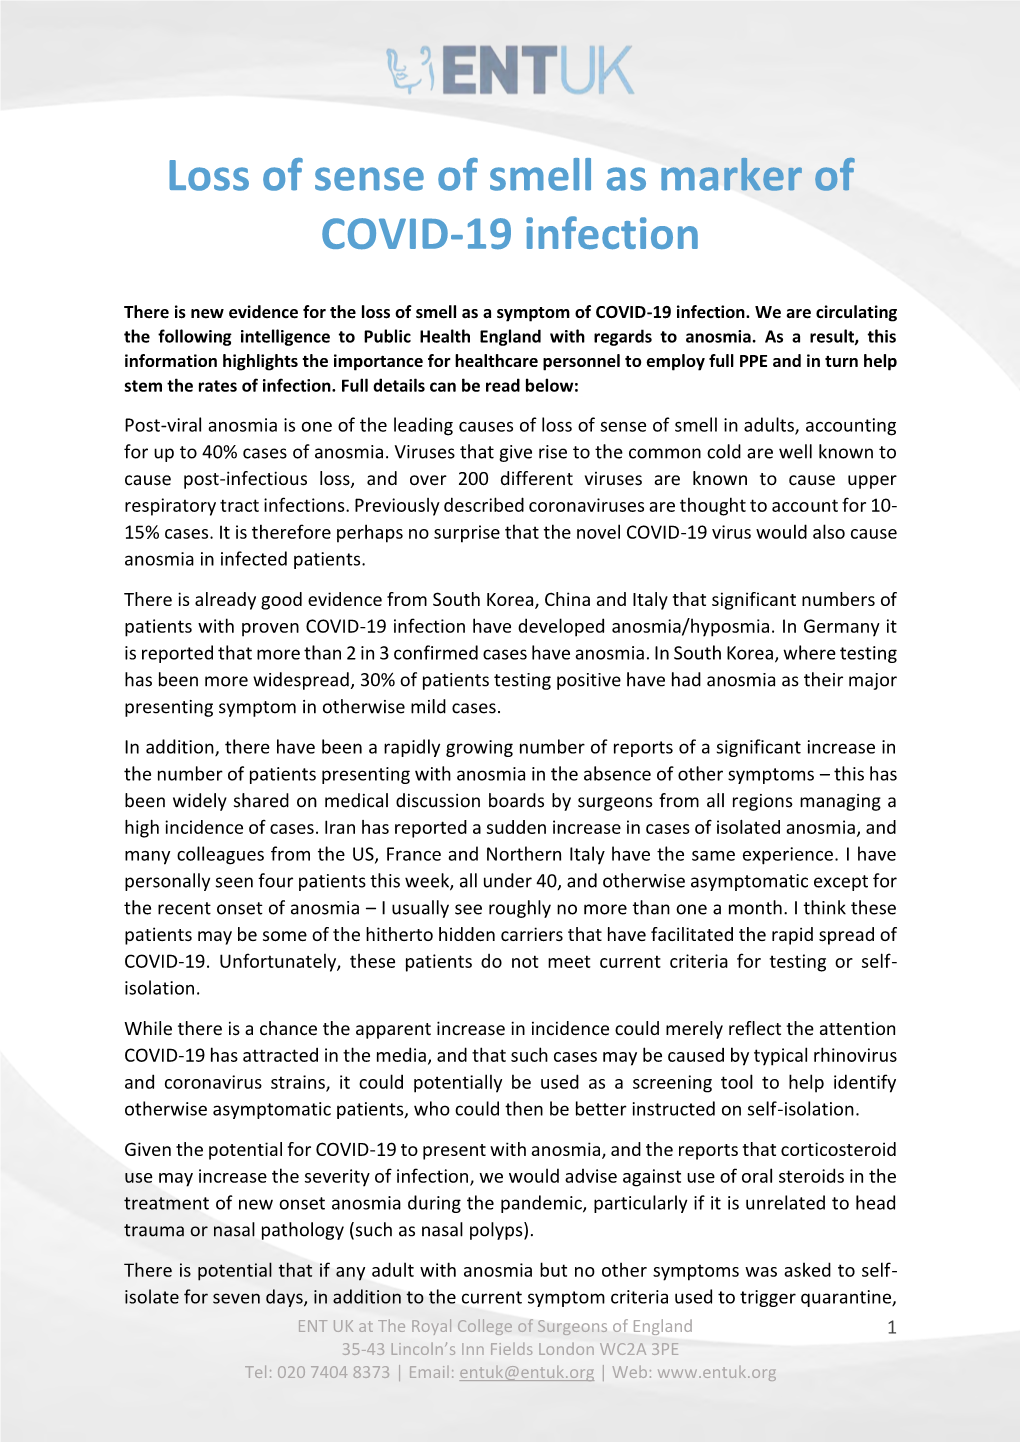 Loss of Sense of Smell As Marker of COVID-19 Infection